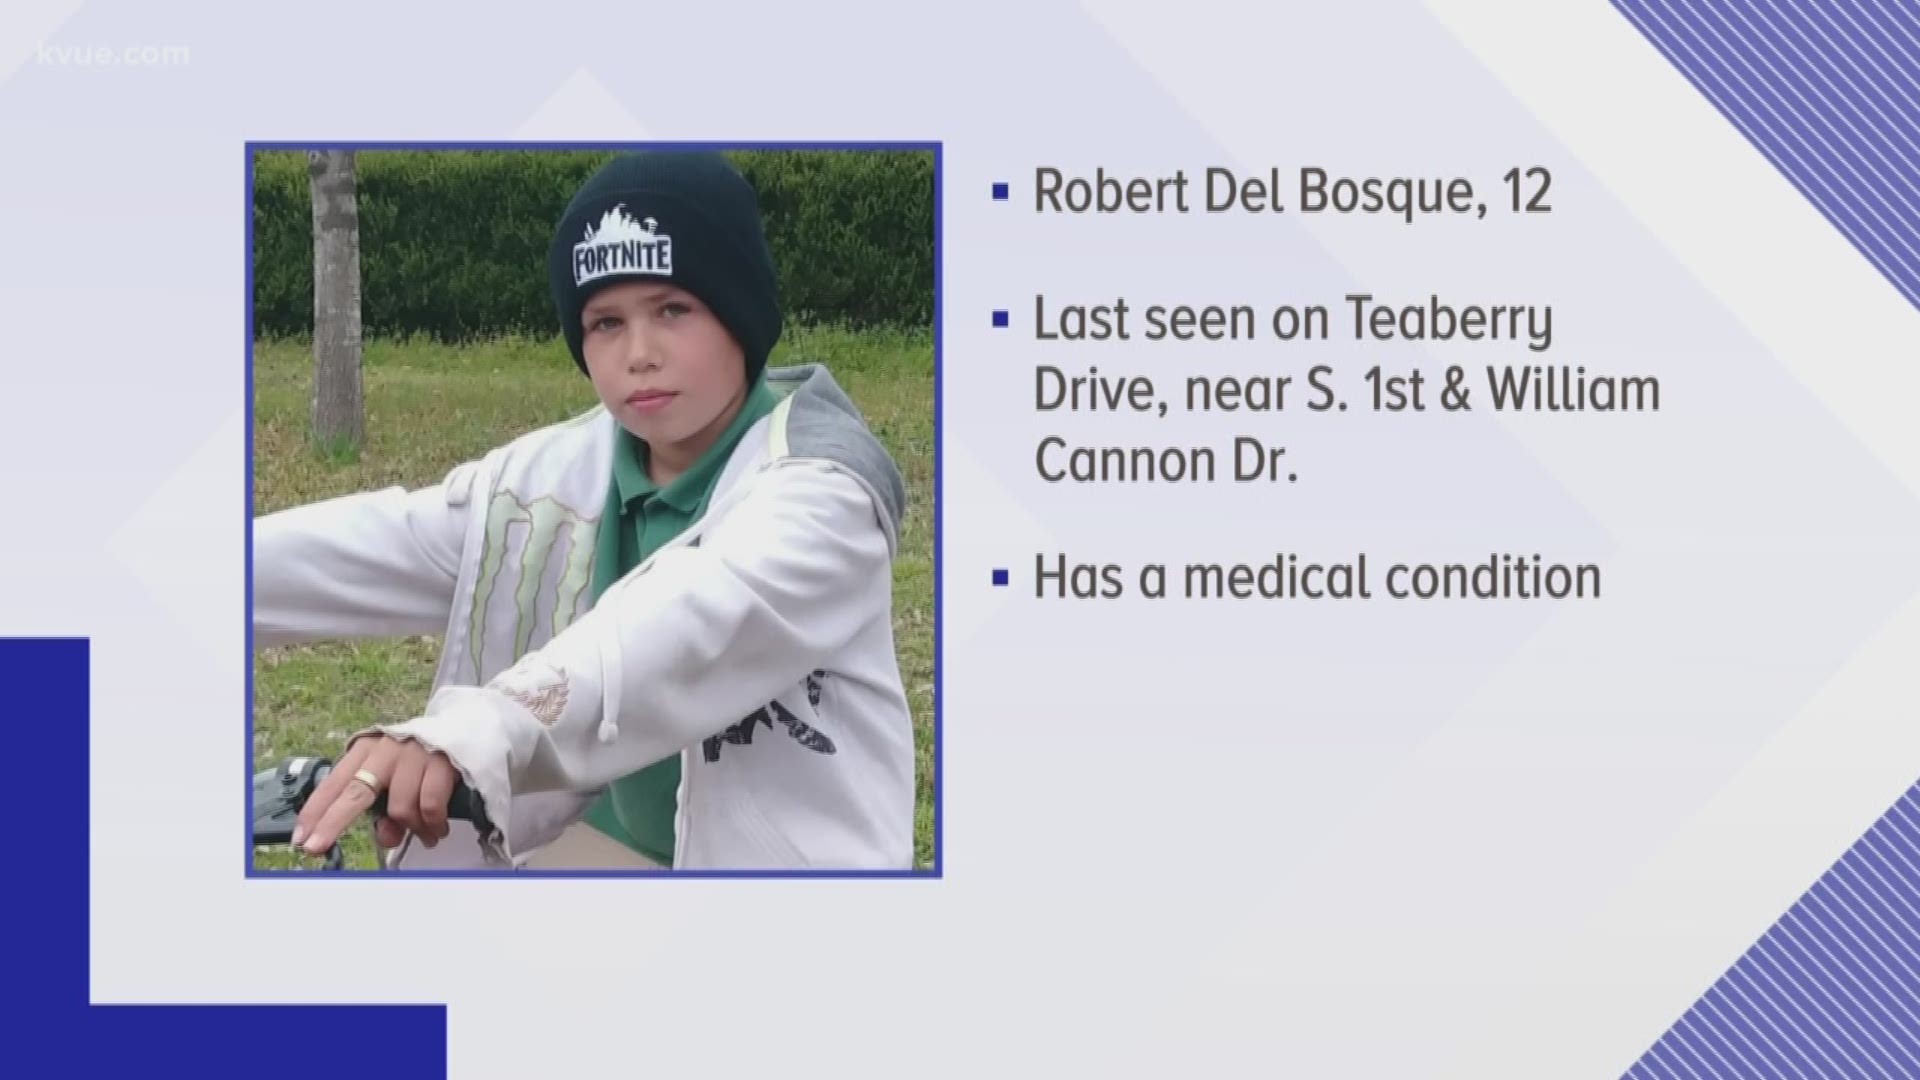 Robert Del Bosque was last seen on Thursday on Teaberry Drive near the intersection of South First Street and William Cannon Drive.